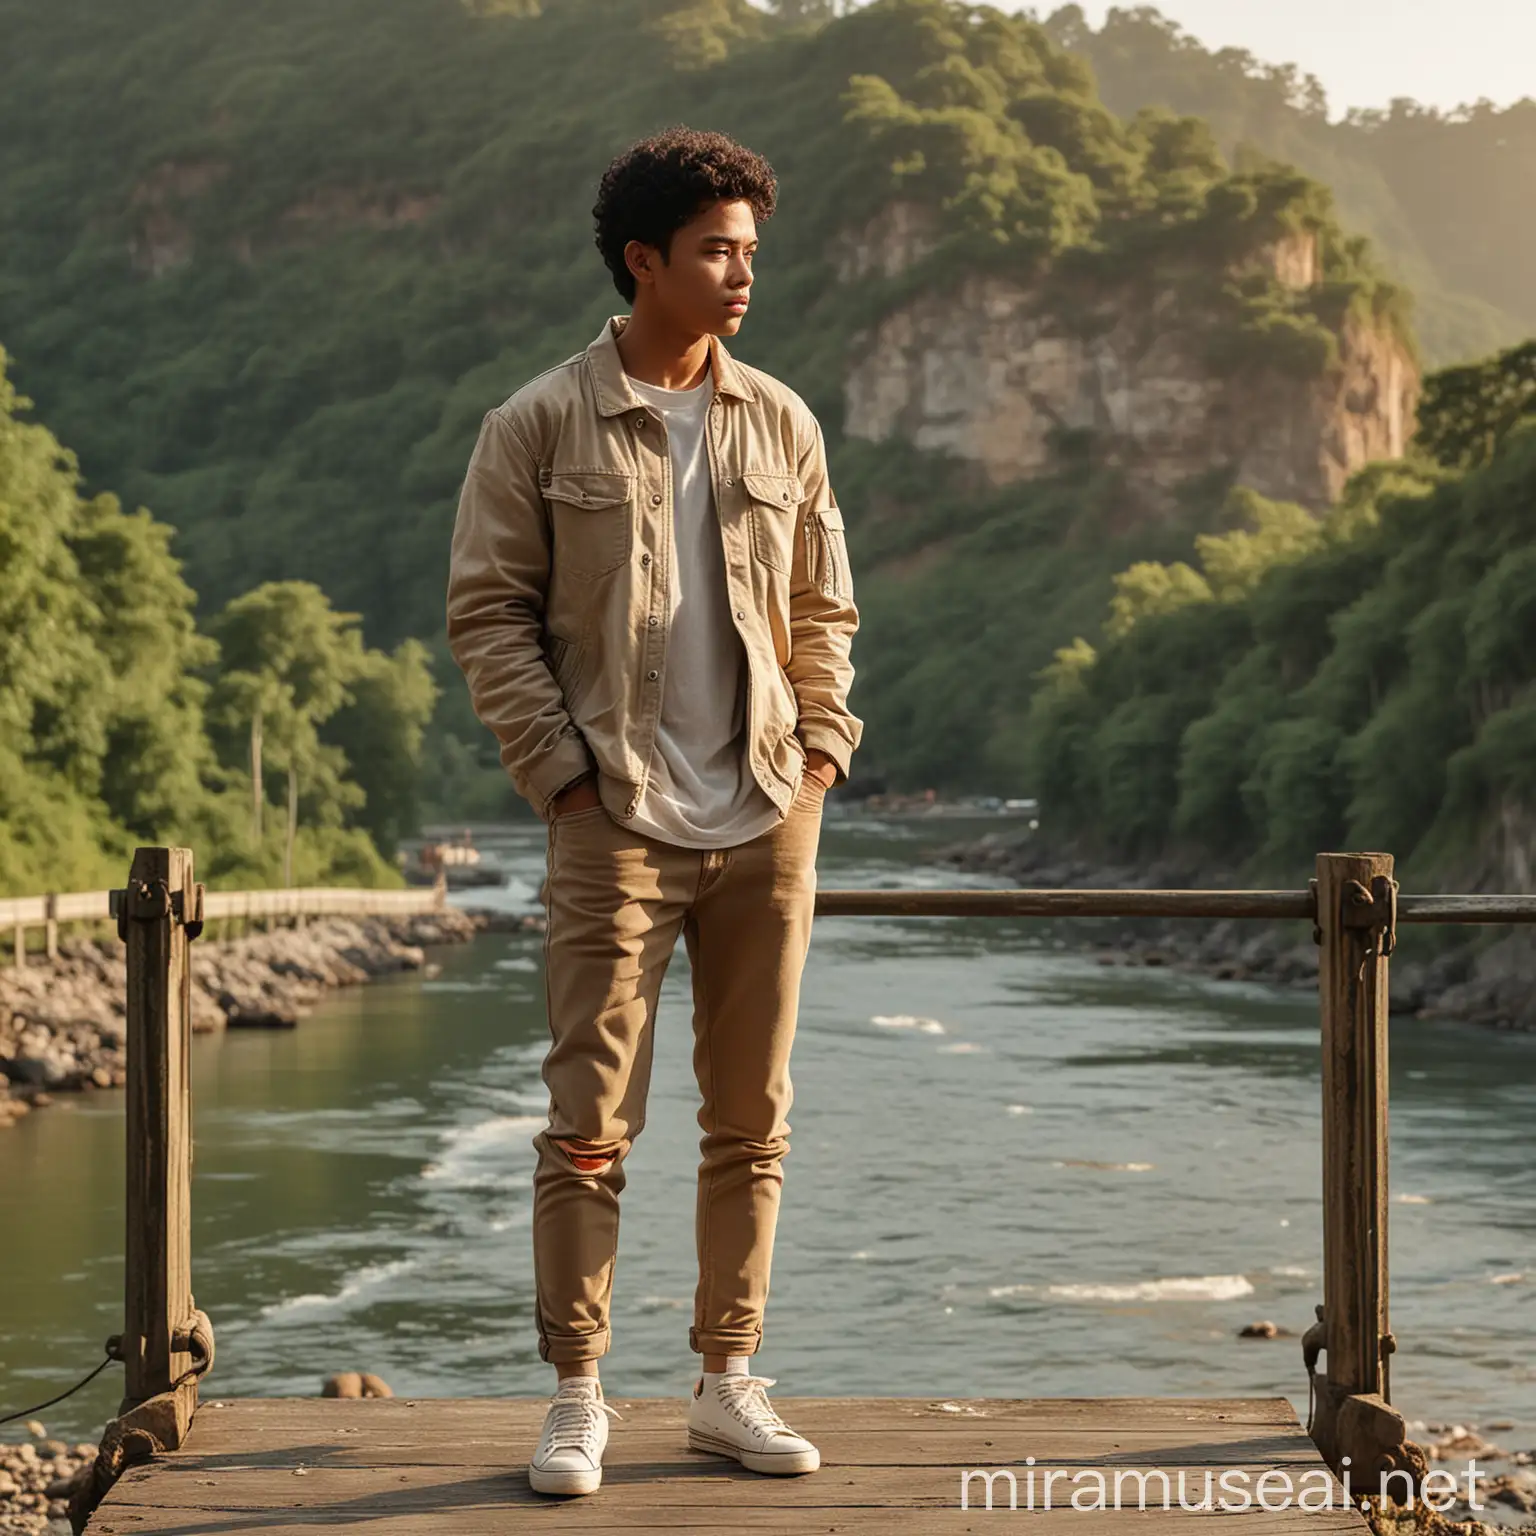 HD 16k realistic portrait from a distance of a slim Indonesian man about 18 years old with short black curly hair wearing a light brown zippered jacket, beige jeans and sneakers, standing on the old bridge over the river in the afternoon, leaning on the bridge pillar, with a beautiful and cool backdrop of green hills, in a raw style. Add details like a soft sunset with warmer lighting to enhance the mood. Make men's poses more dynamic.